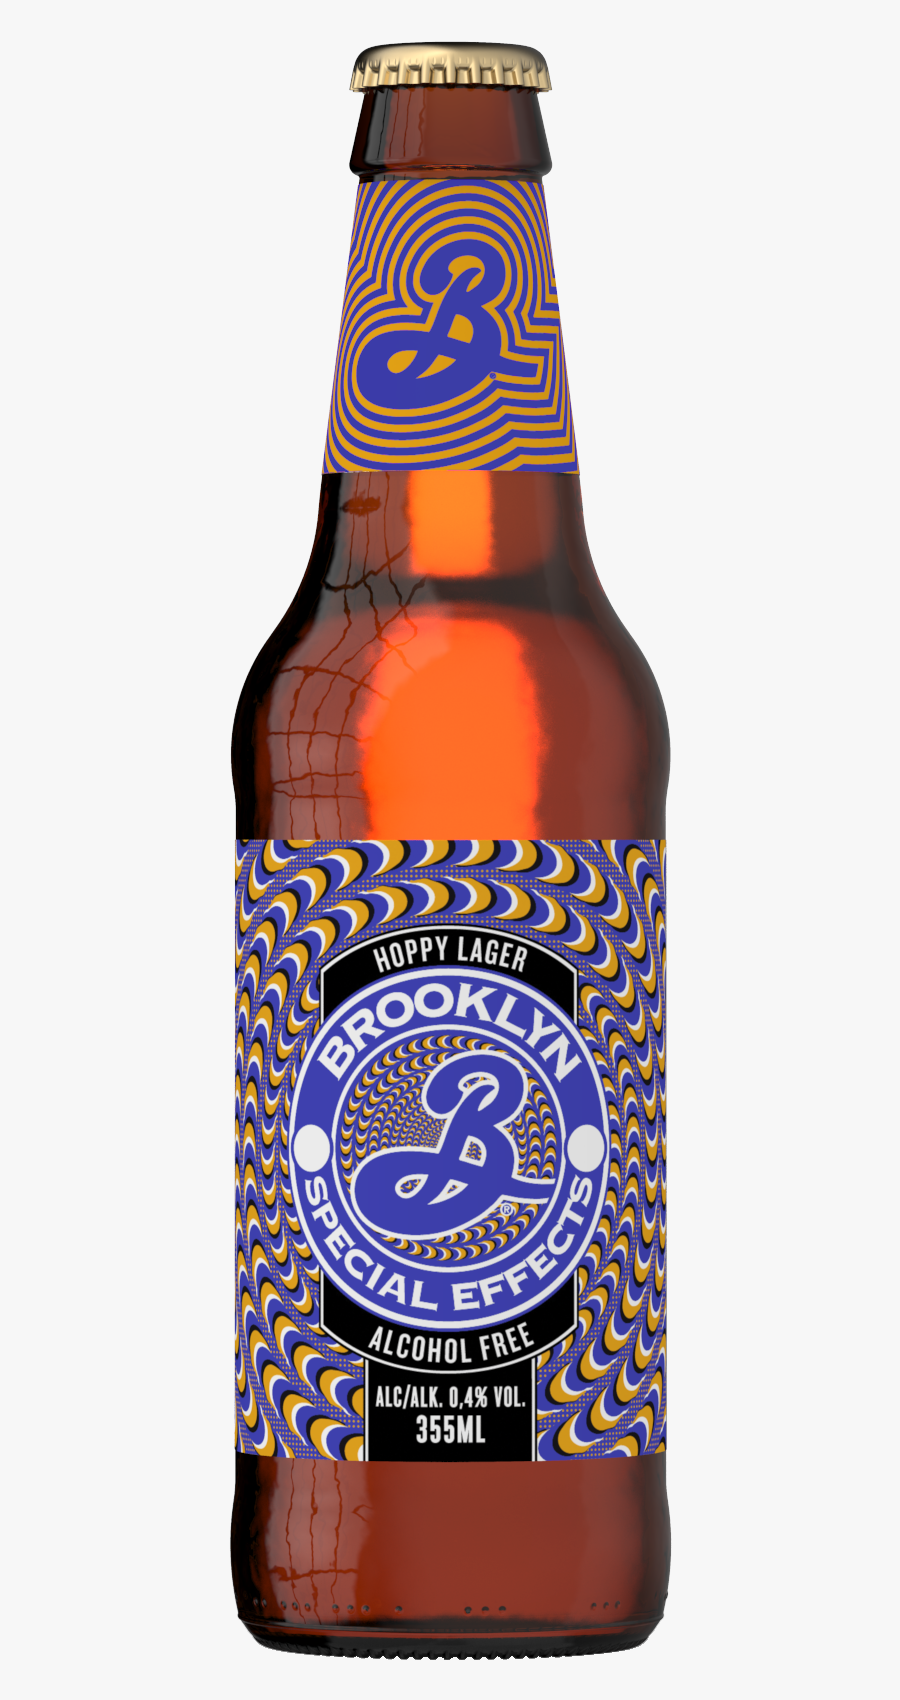 Transparent Png Special Effects - Brooklyn Brewery Special Effects, Transparent Clipart